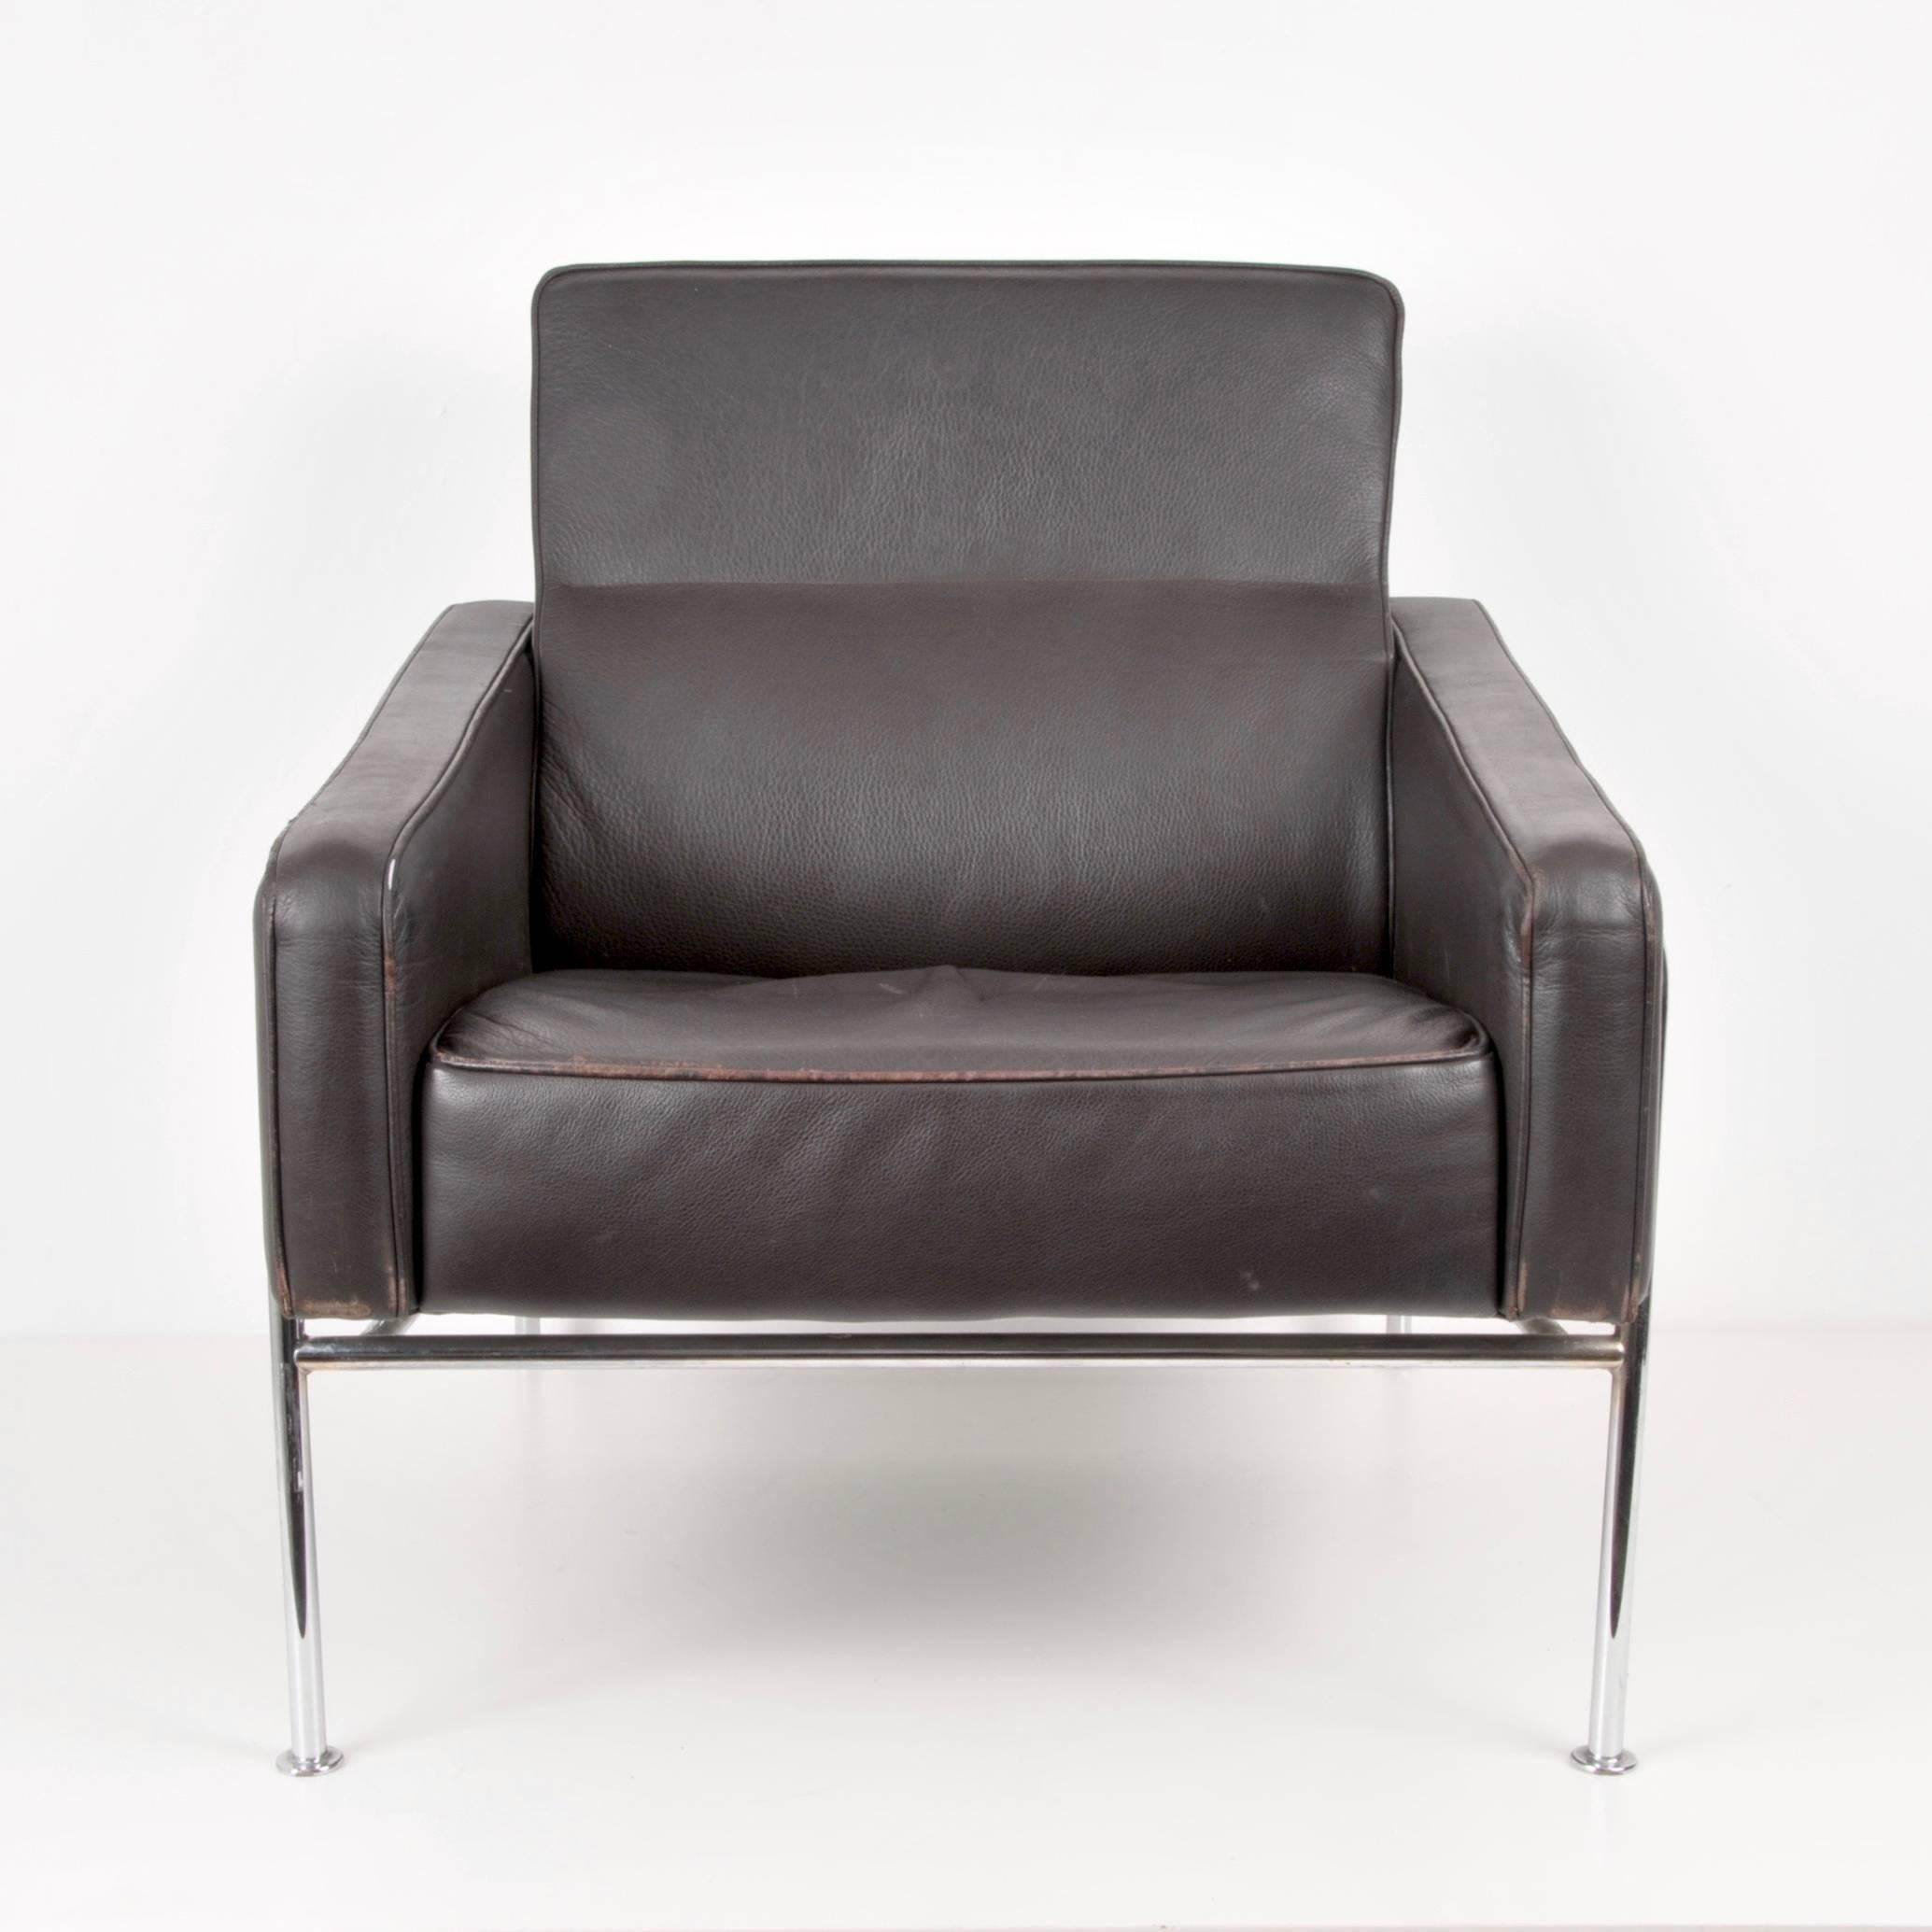 Mid-Century Modern Midcentury Dark Brown Leather Lounge Chair Attributed to Arne Jacobsen, 1956 For Sale